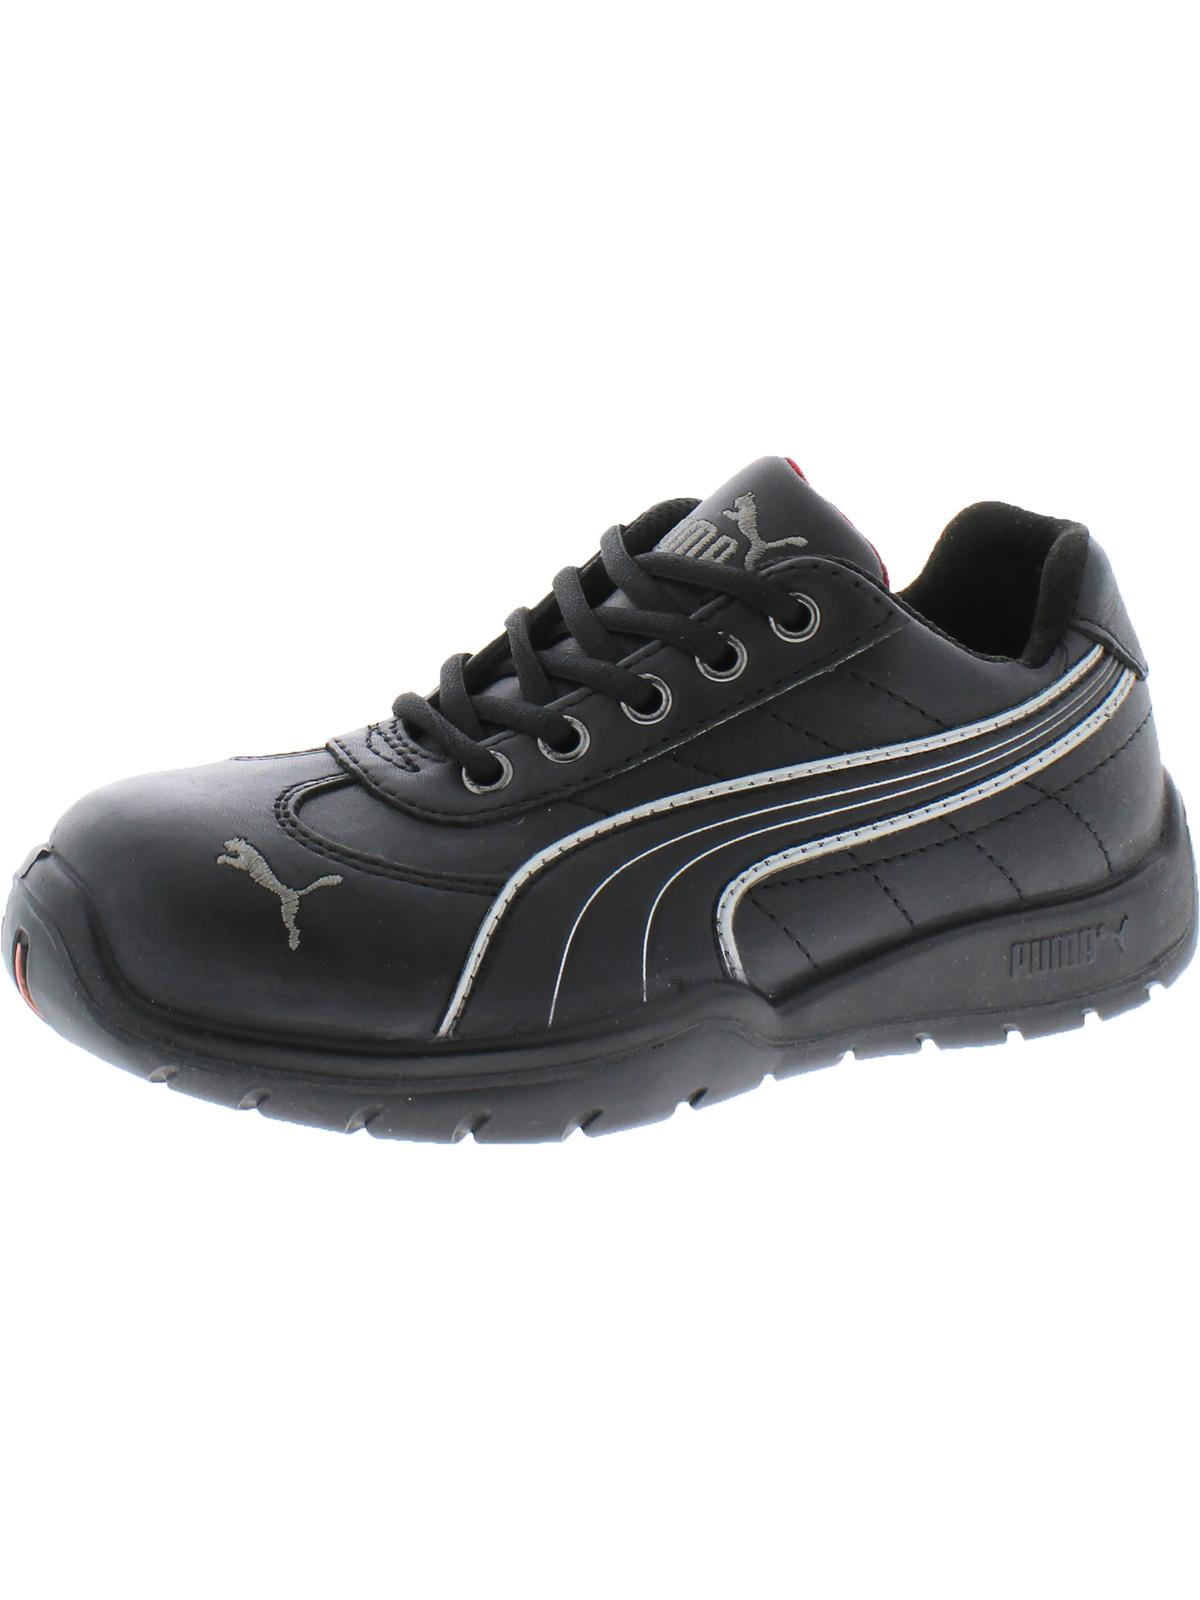 Puma Womens Leather Sneakers Safety Shoes Black 6 Medium (B,M)